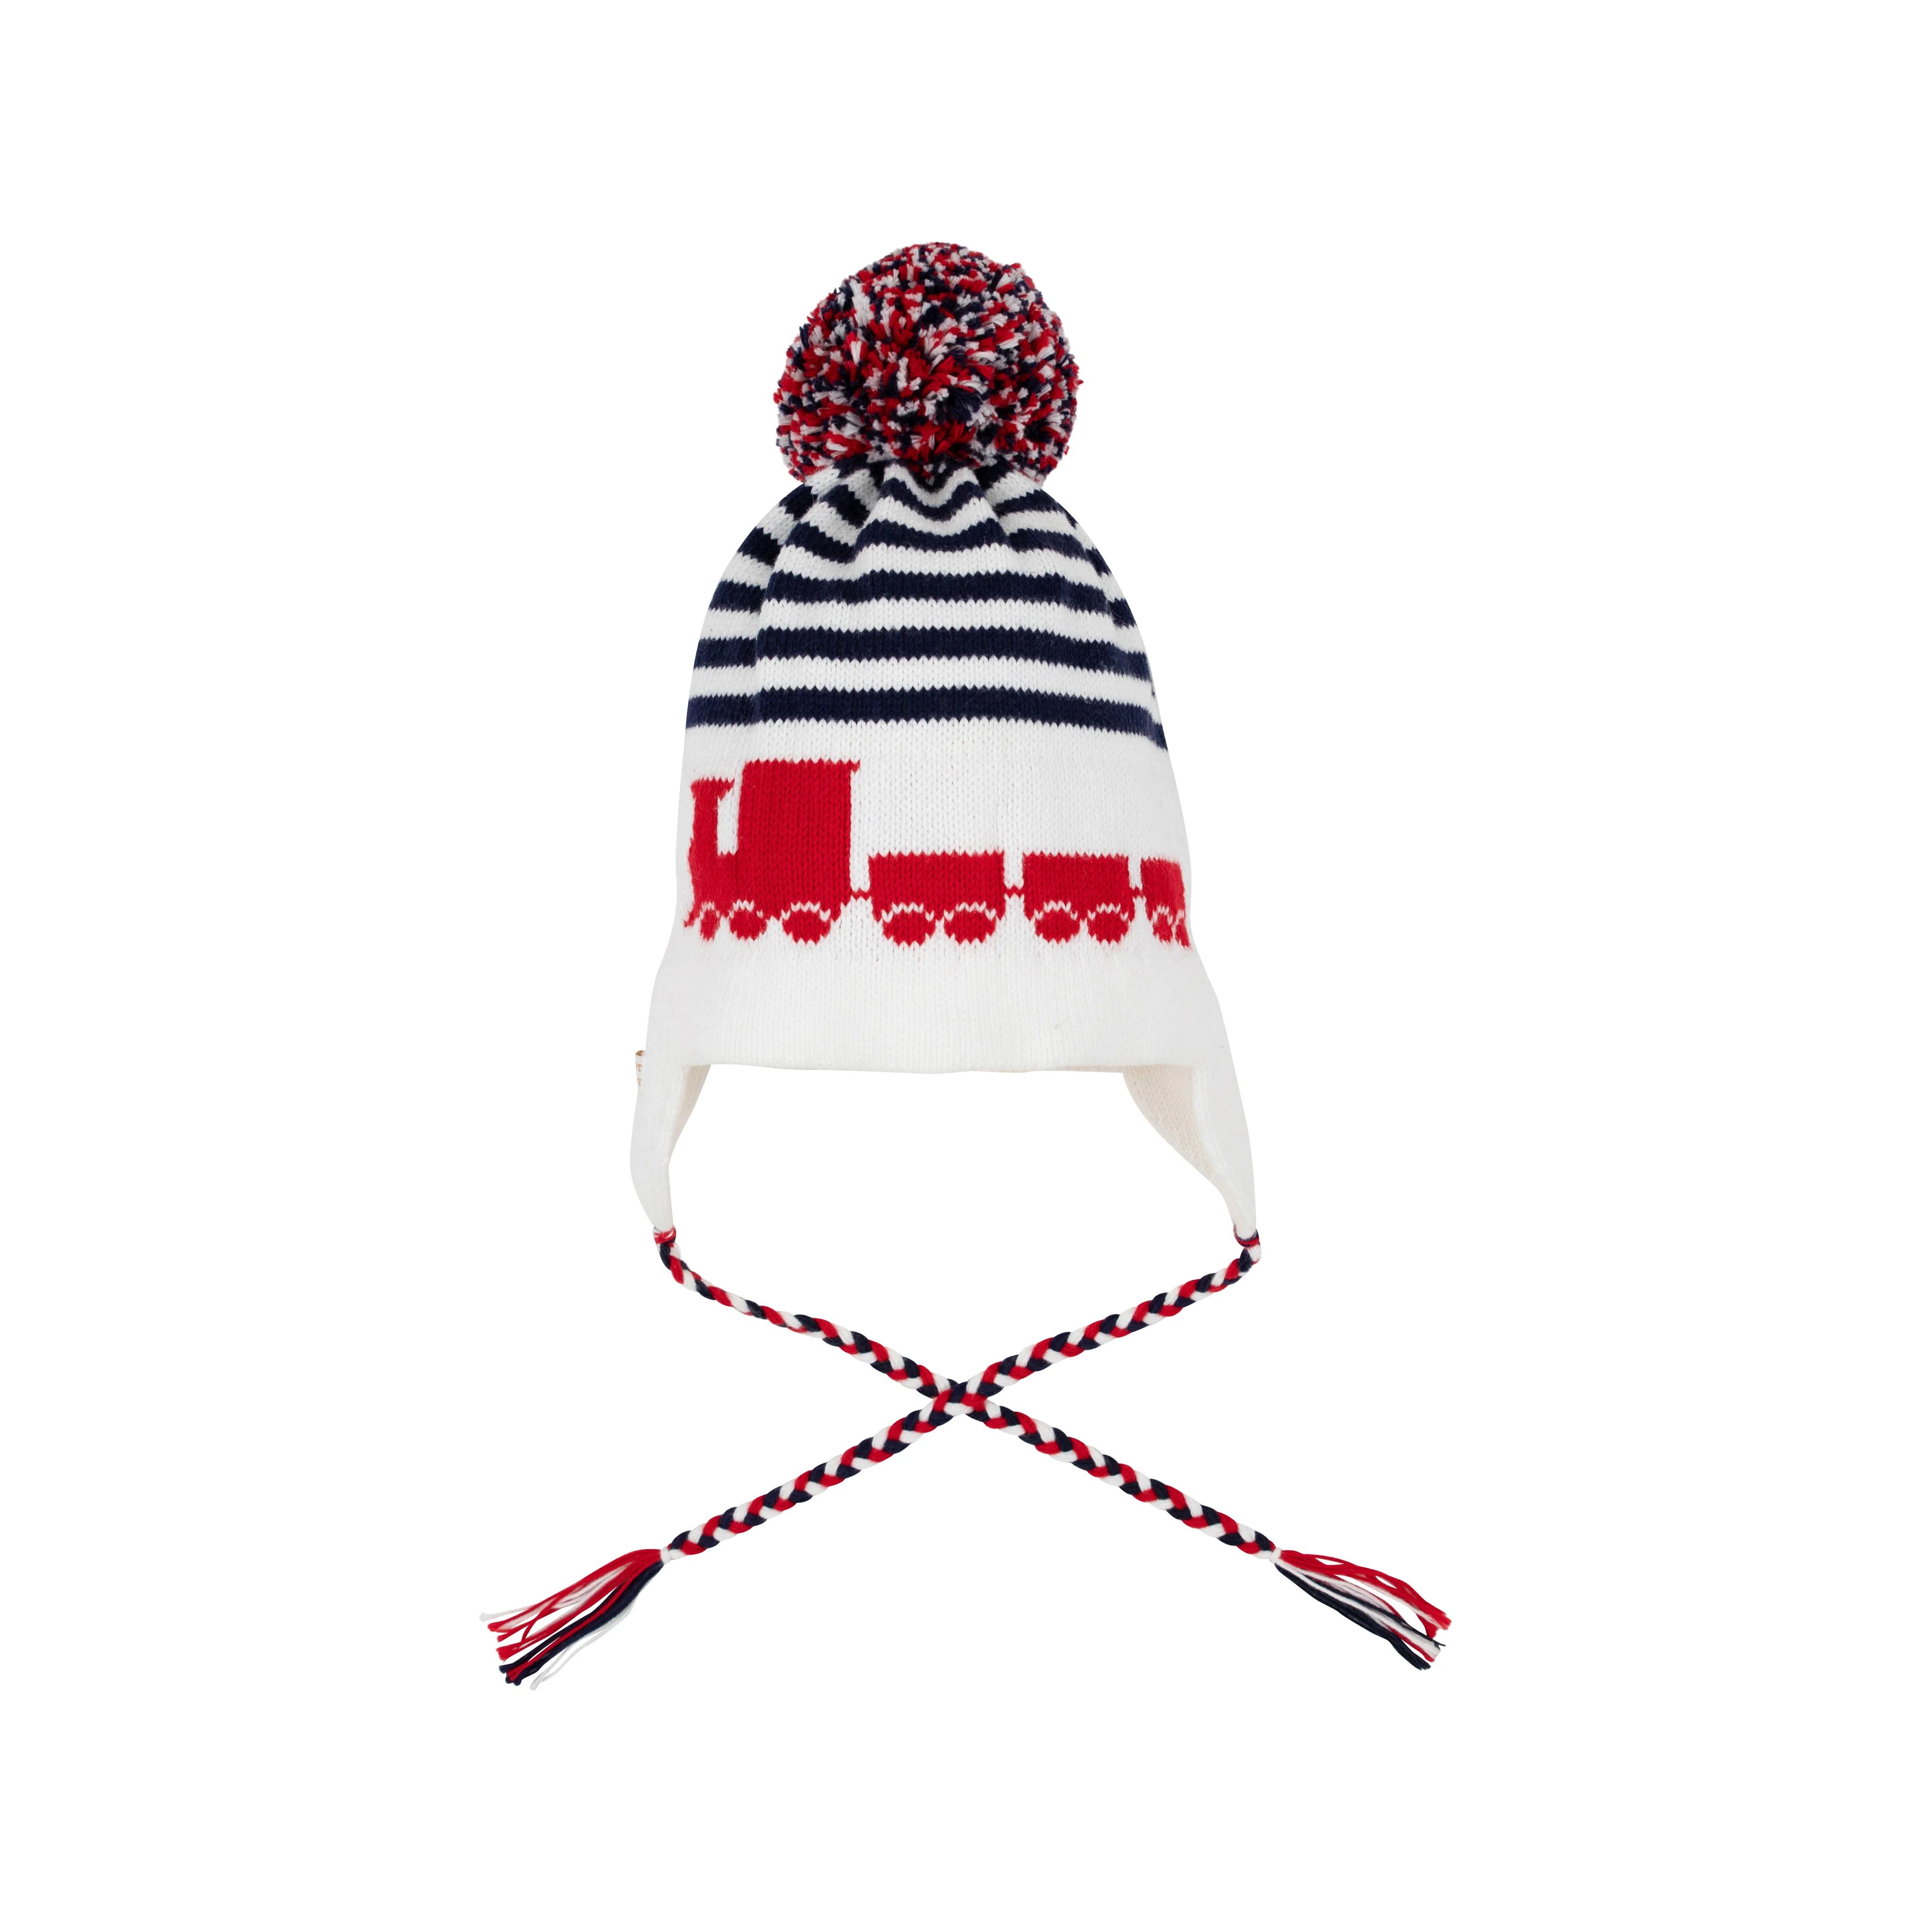 Parrish Pom Pom Hat - Worth Avenue White with Nantucket Navy & Trains | The Beaufort Bonnet Company